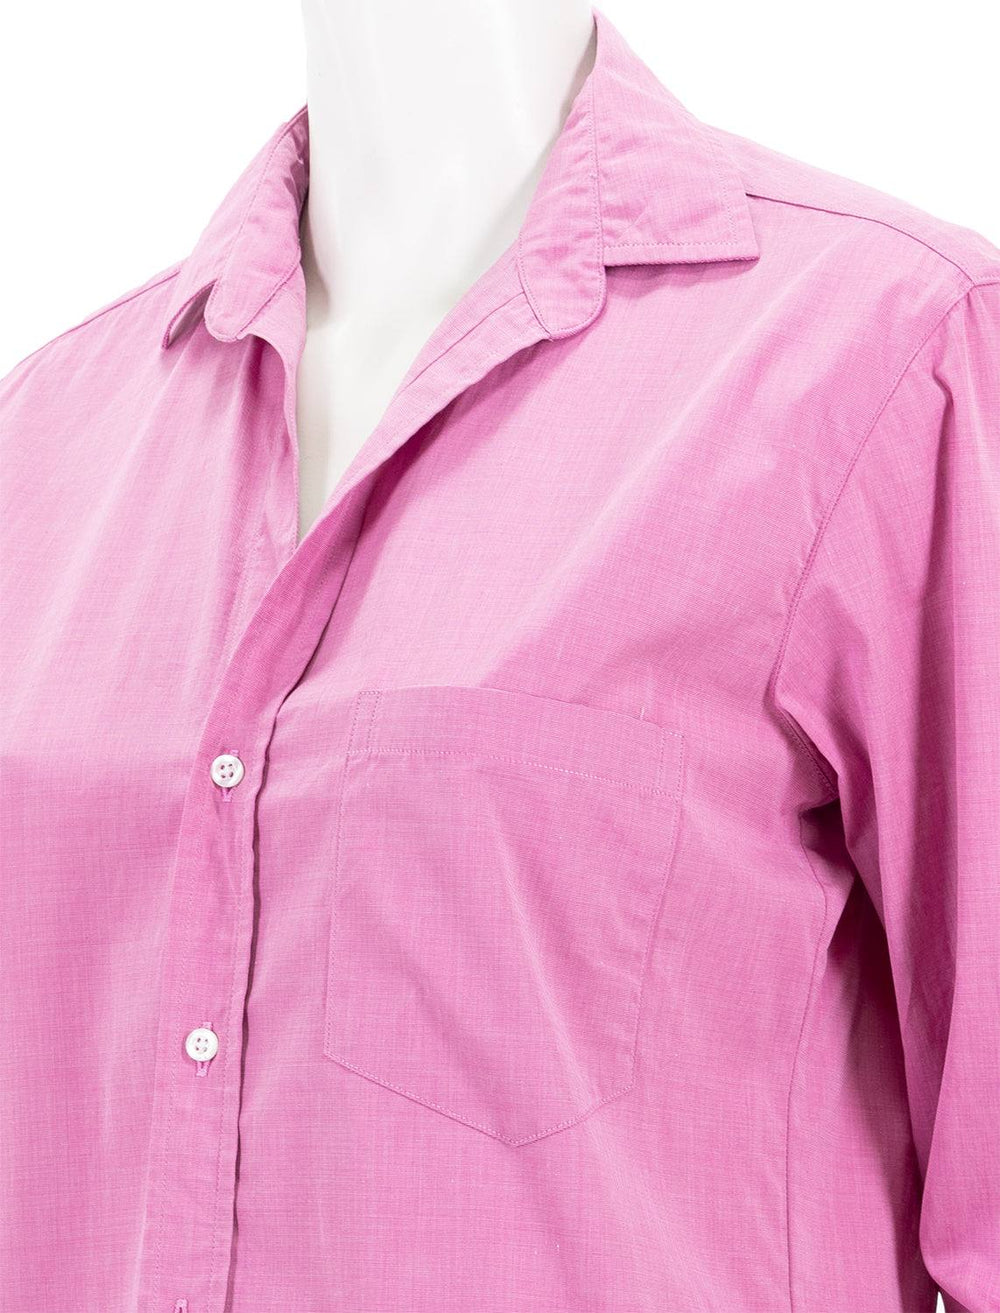 Close-up view of Frank & Eileen's joedy shirt in magenta end on end.